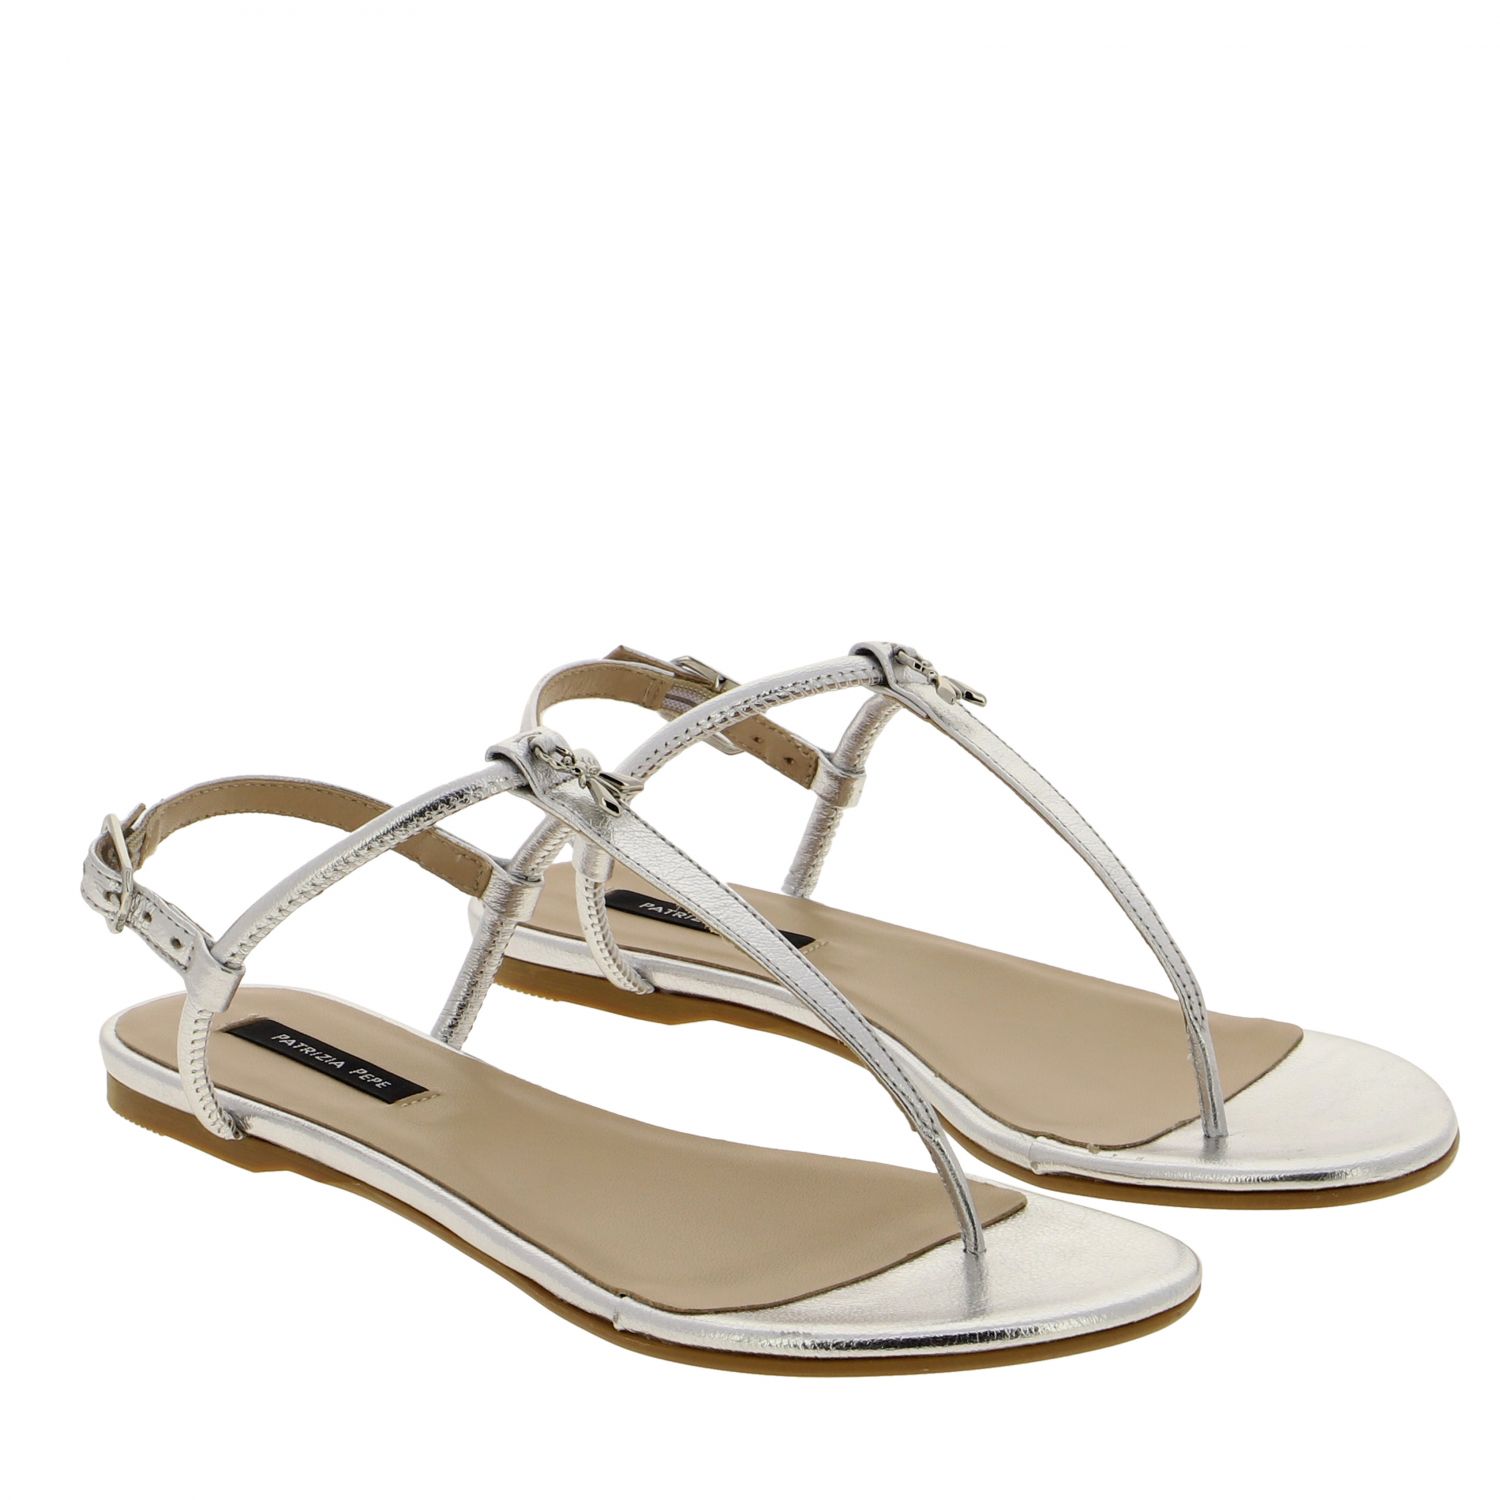 Patrizia Pepe Outlet: thong sandal in laminated leather | Flat Sandals ...